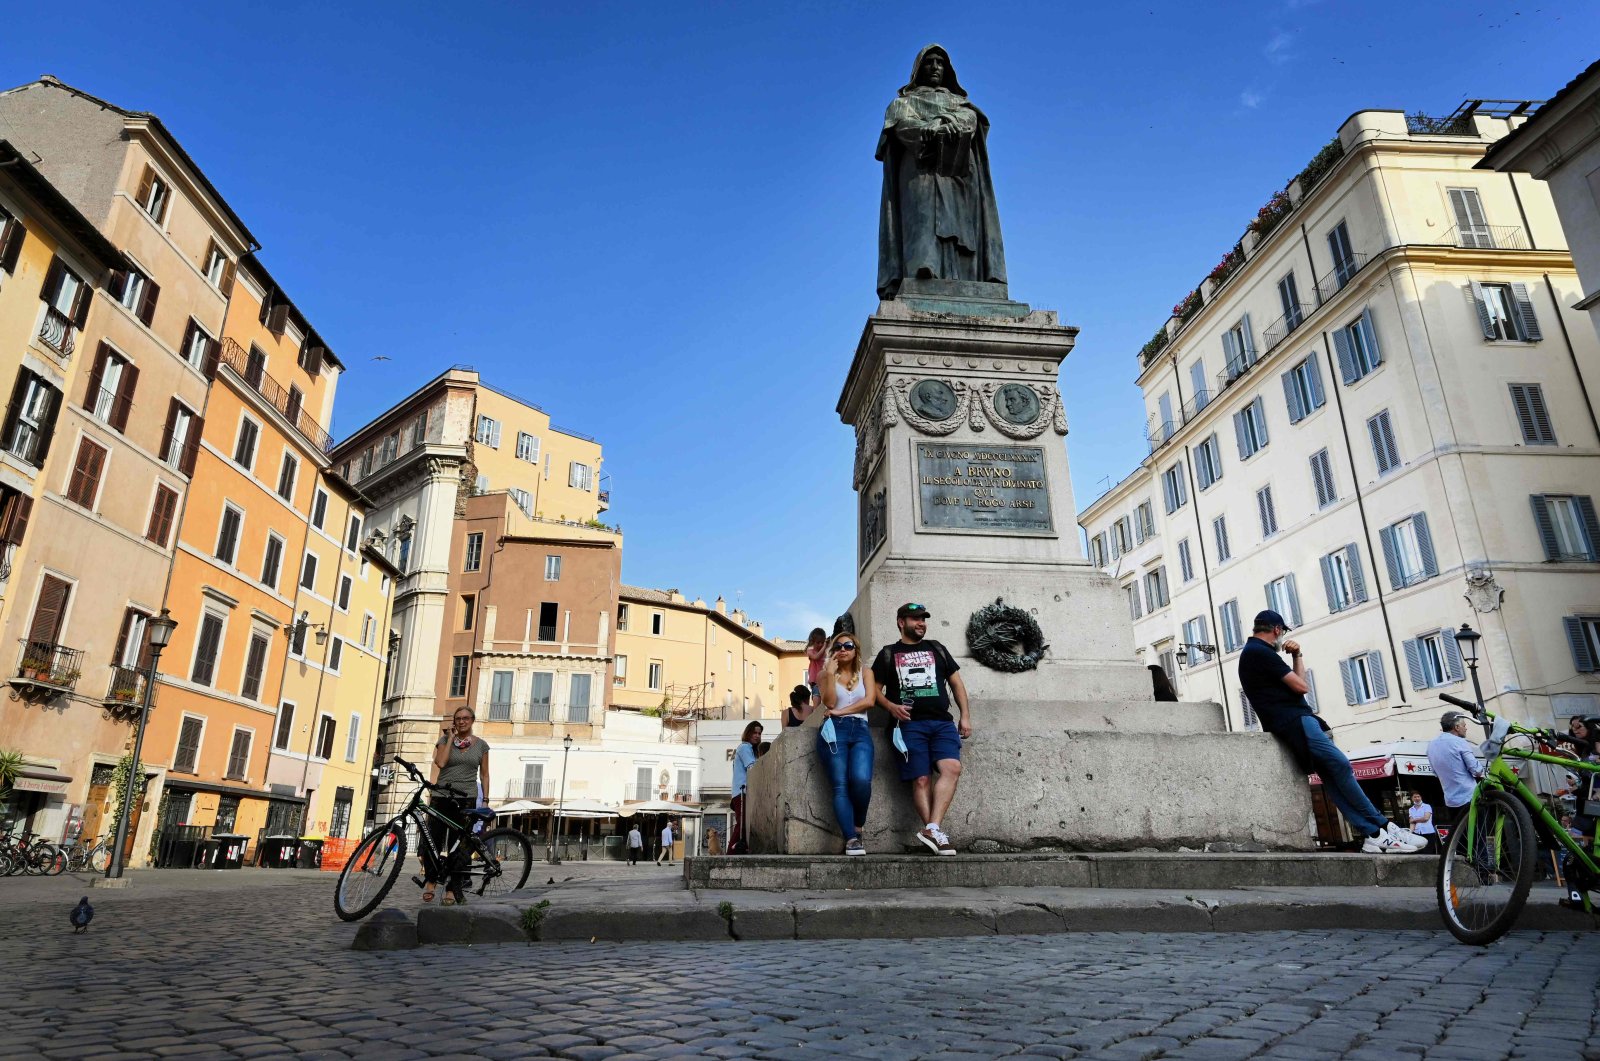 People relax on Campo dei Fiori in central Rome, on May 18, 2020 as the country's lockdown is easing after over two months, aimed at curbing the spread of the COVID-19 infection, caused by the novel coronavirus. (AFP Photo)